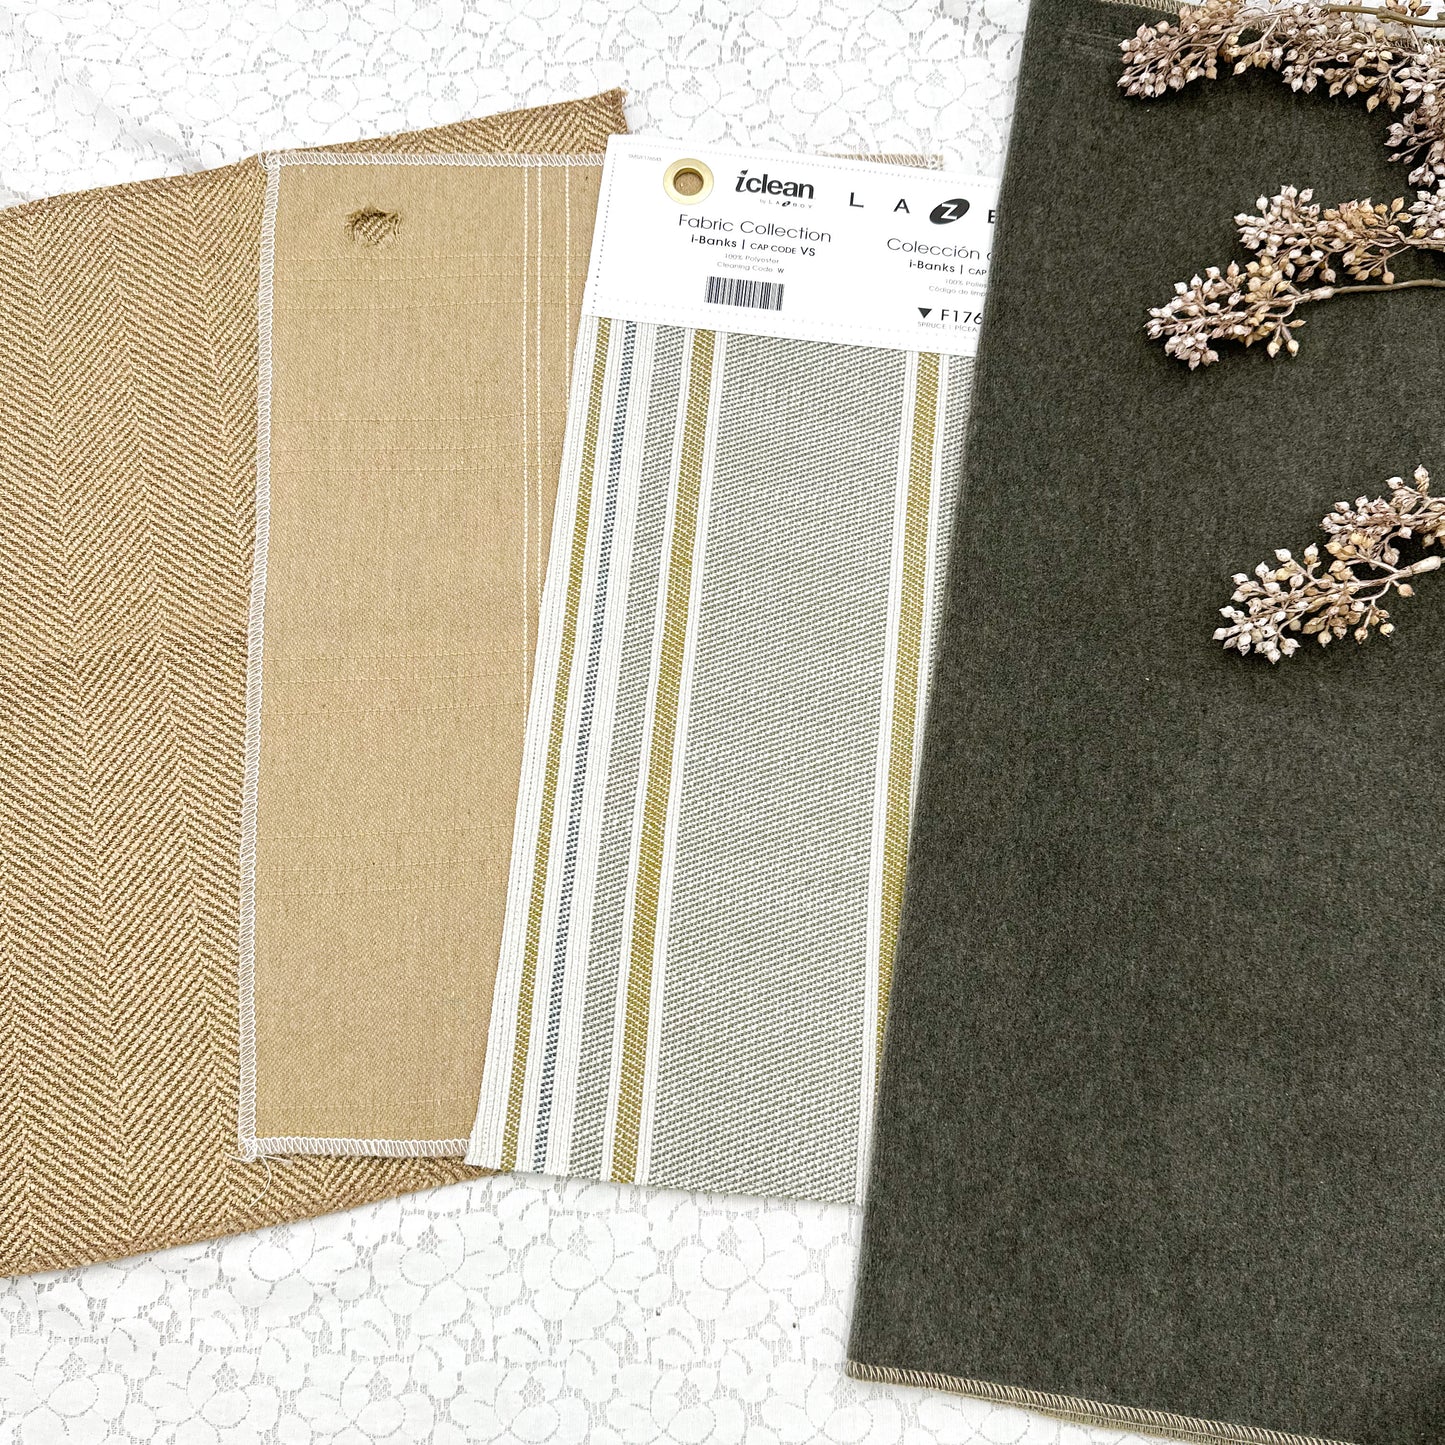 Upholstery Fabric Samples with Hangers (set of 4)